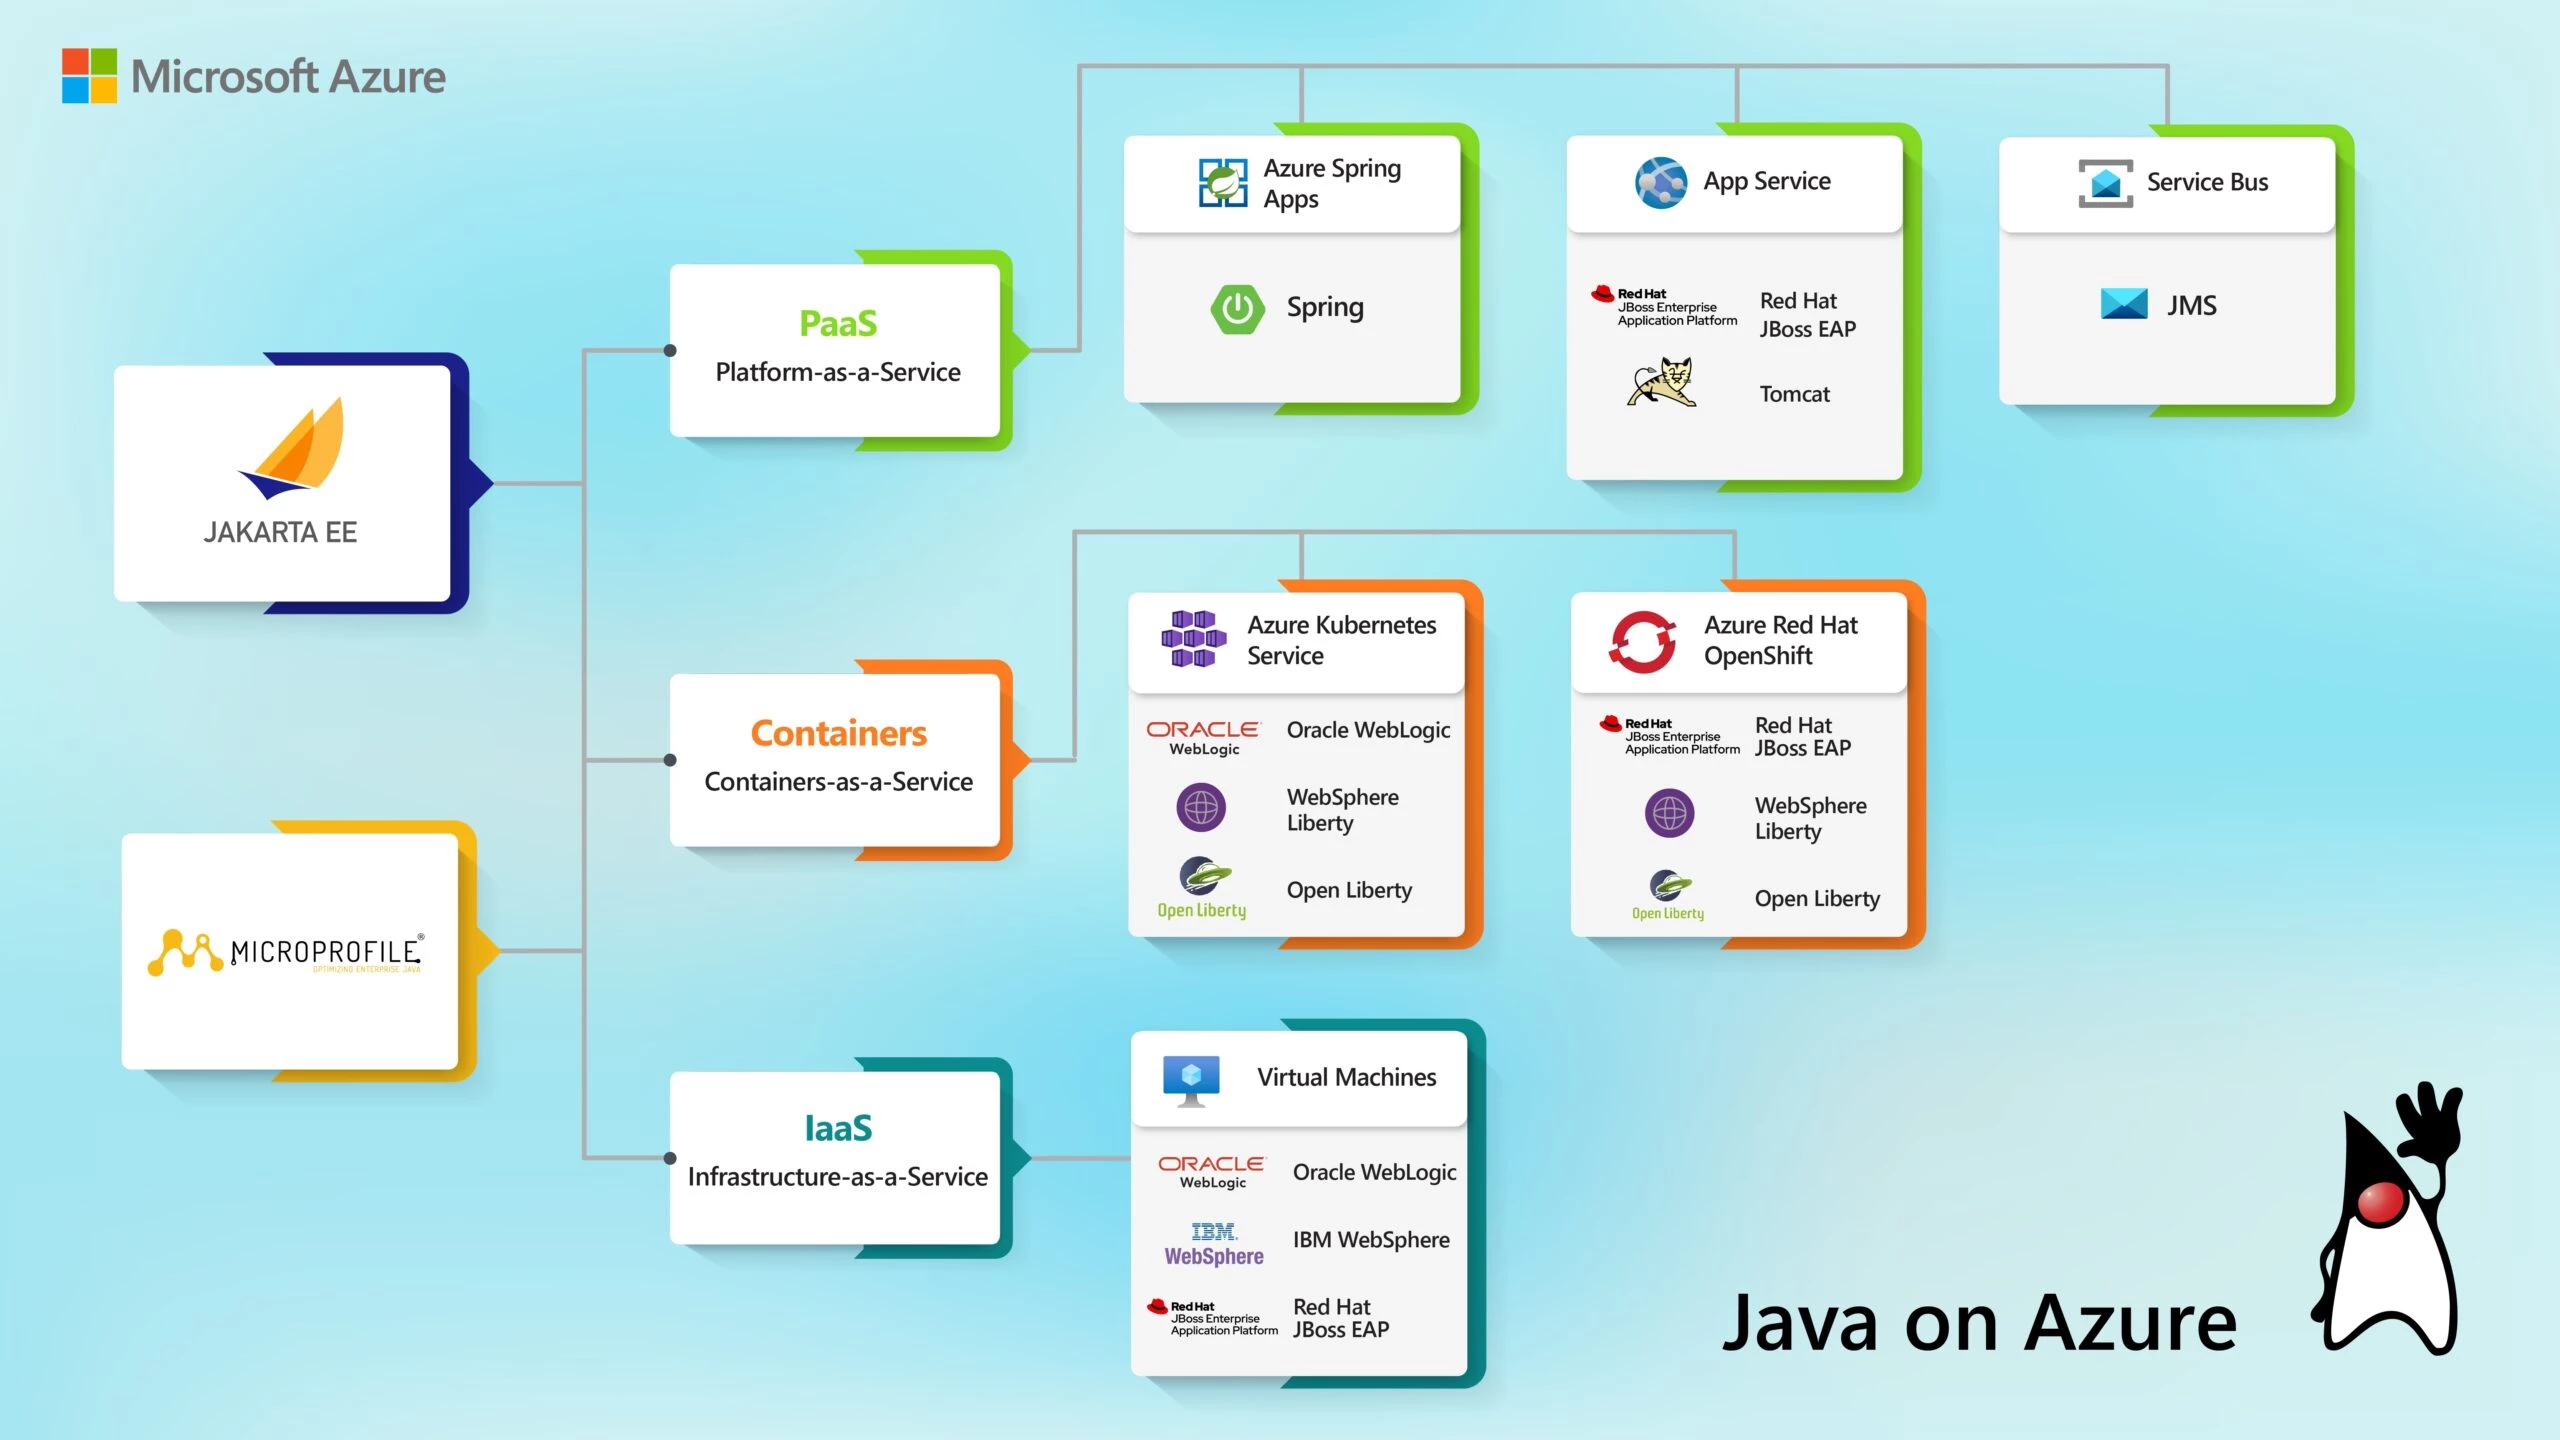 image shows Java on Azure offerings for Jakarta EE and MicroProfile technologies)